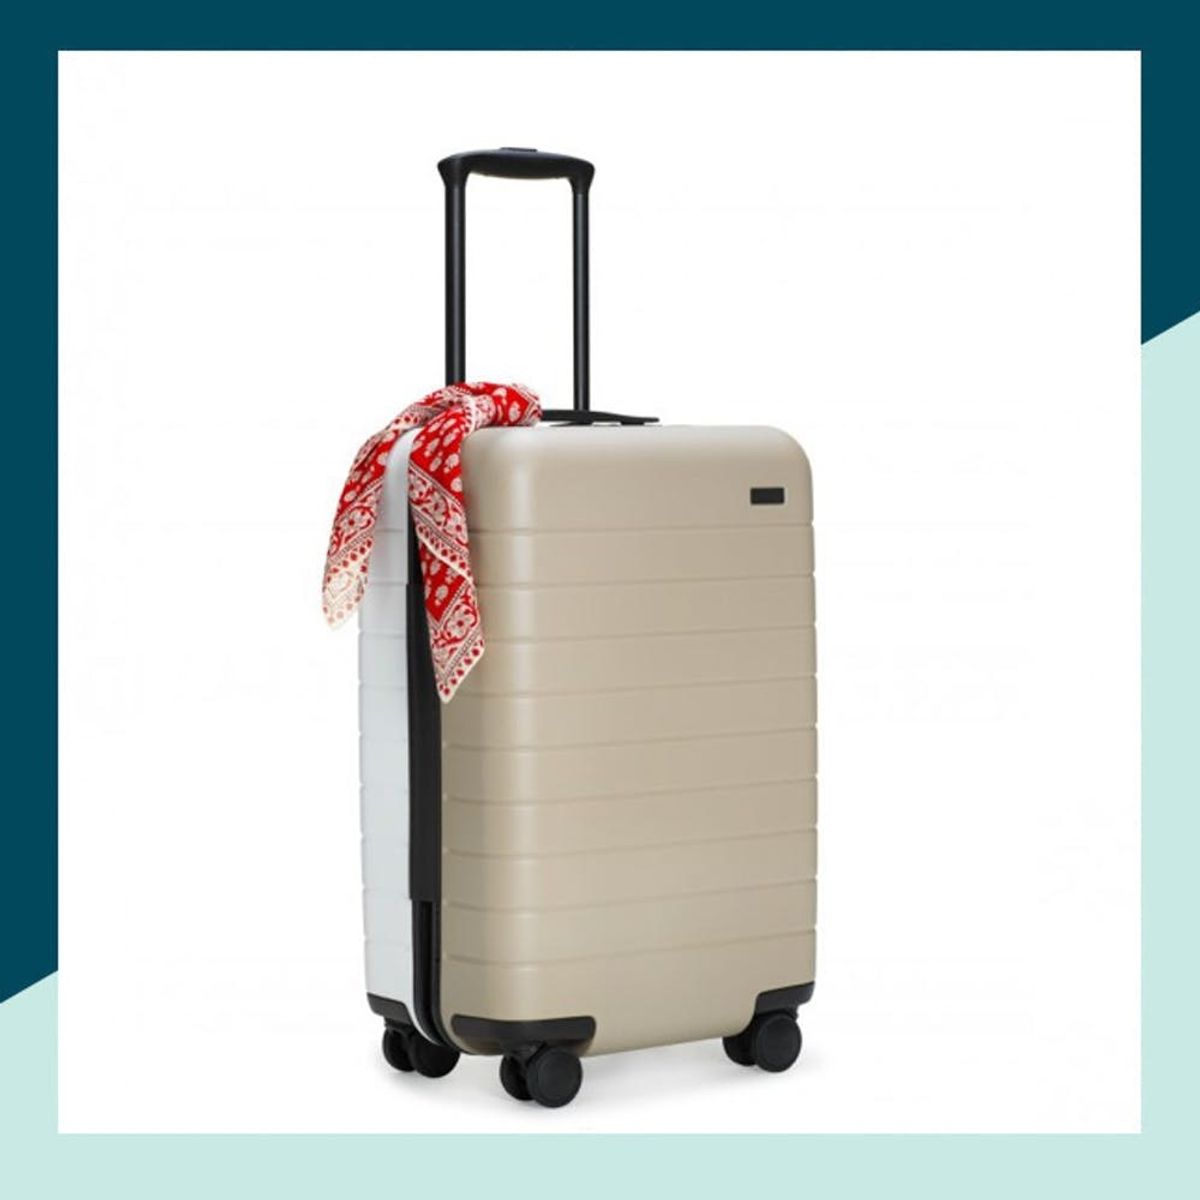 Is It Just Us or Is the New Away x Madewell Suitcase Perfect?